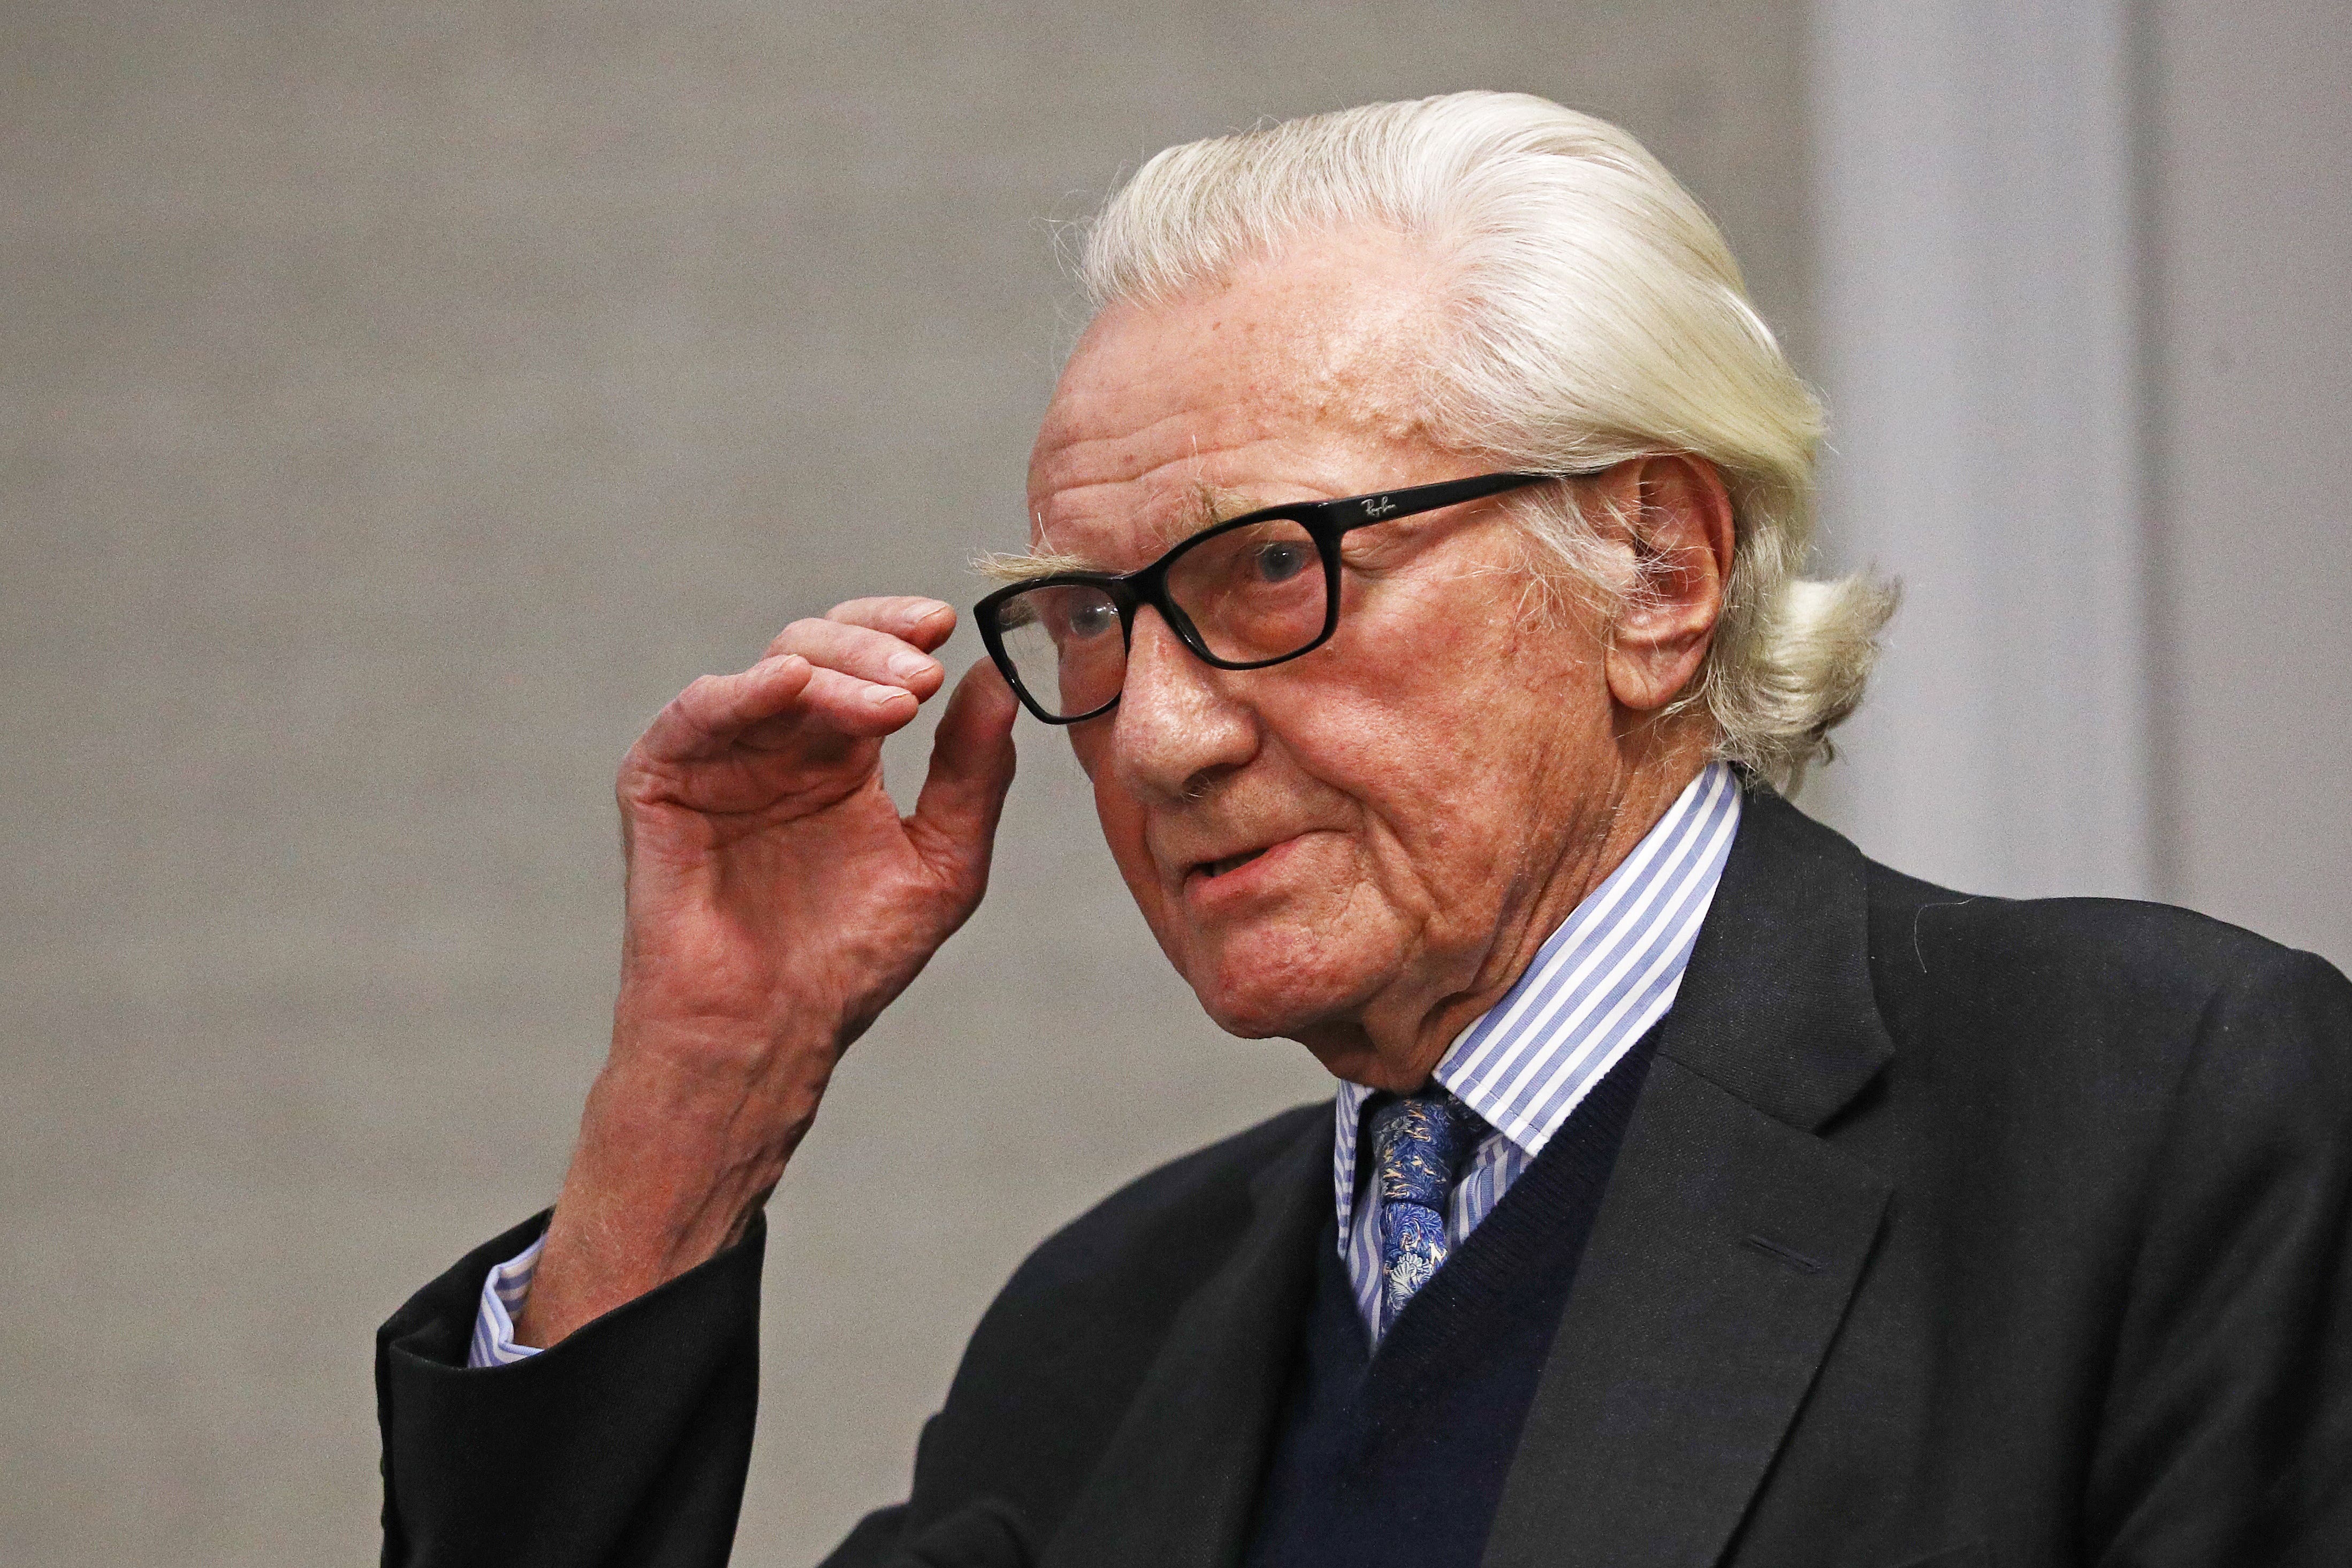 Lord Michael Heseltine warns that the election campaign will be 